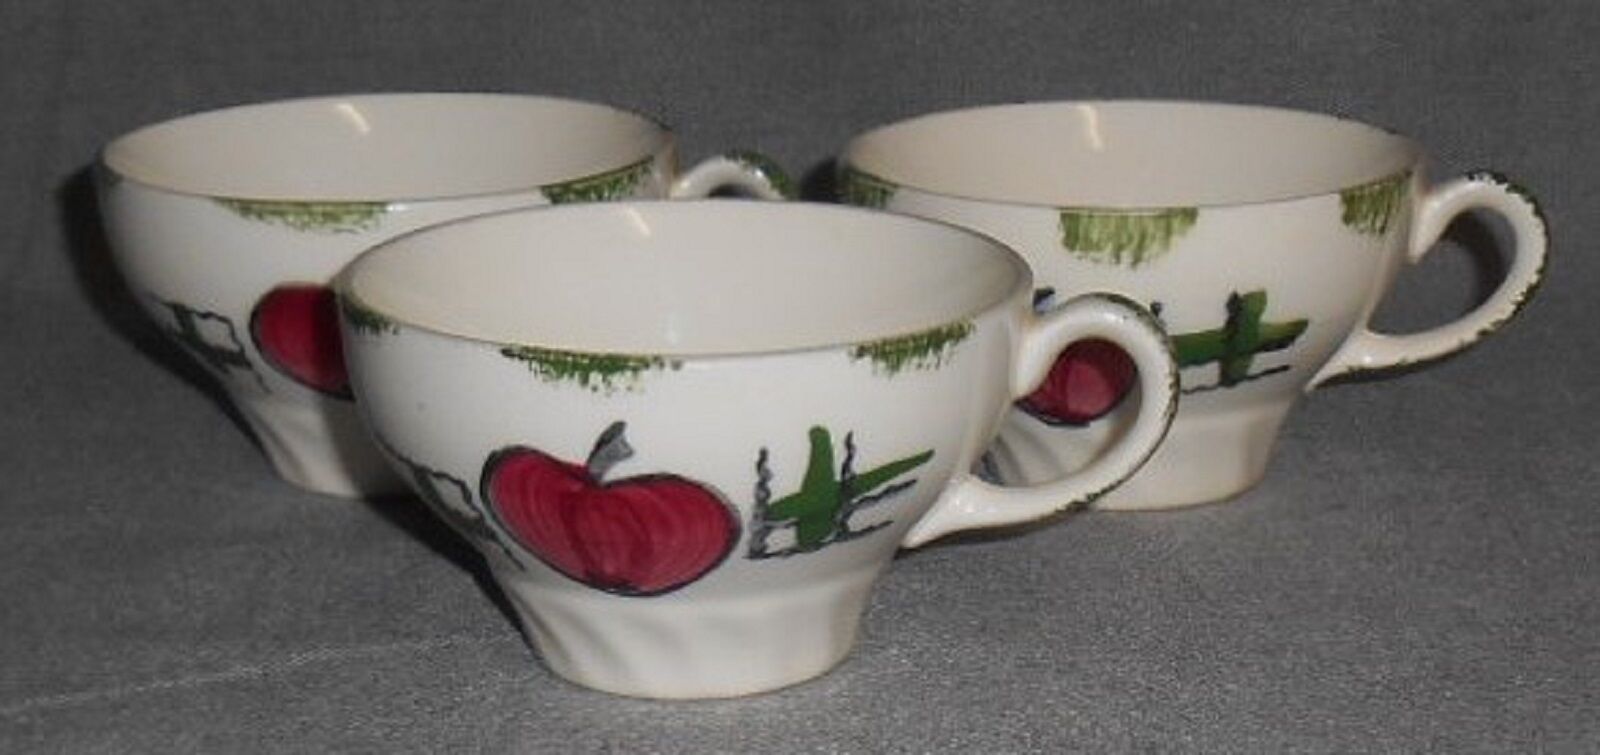 Primary image for Set (3) Blue Ridge APPLE PATTERN Handled Cups HAND PAINTED